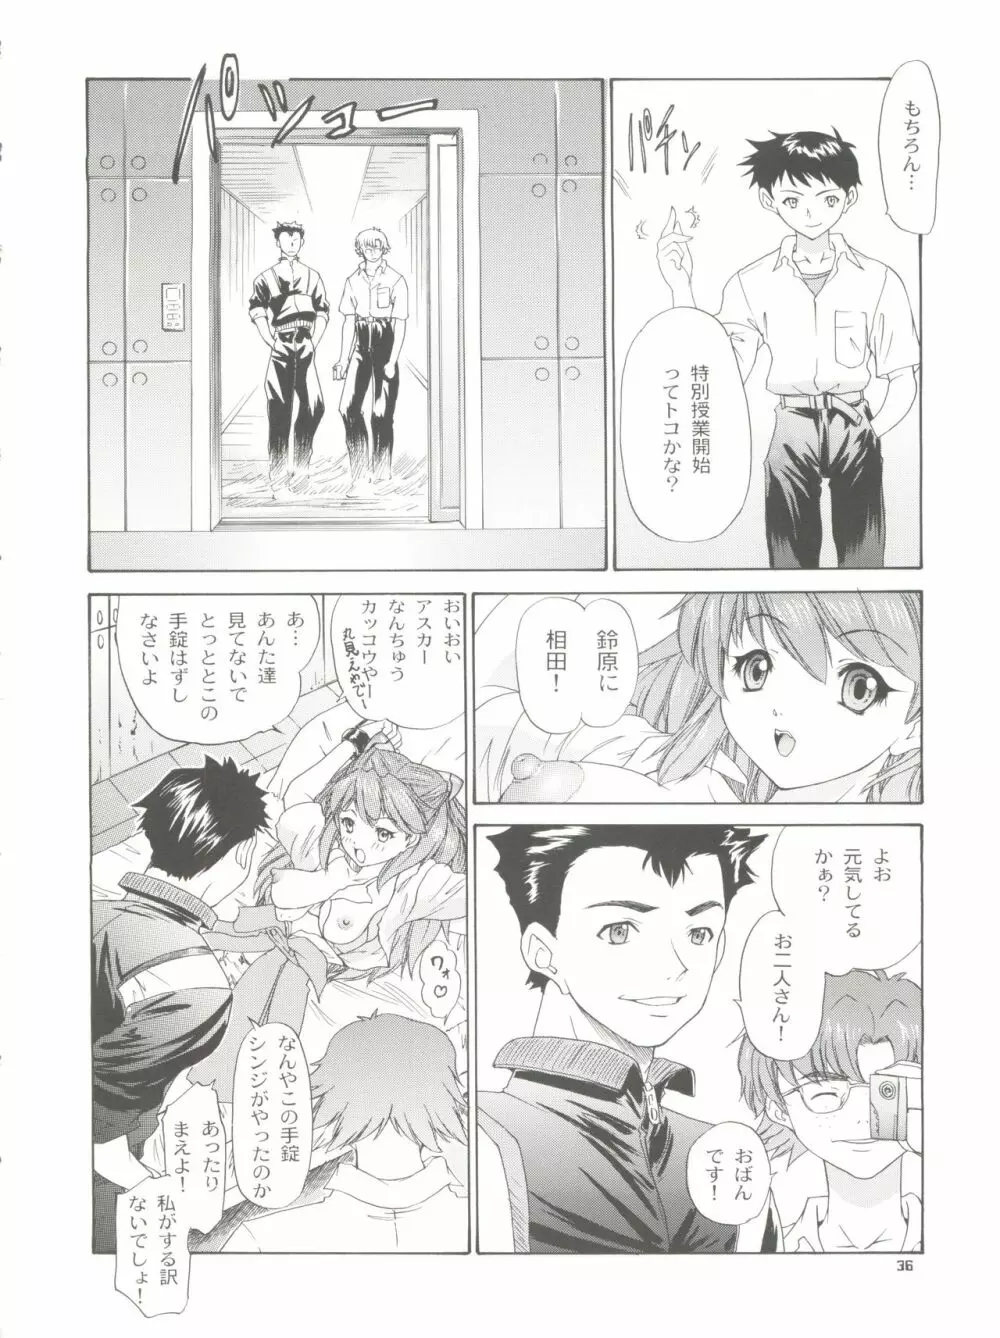 2002 ONLY ASKA side B Page.38